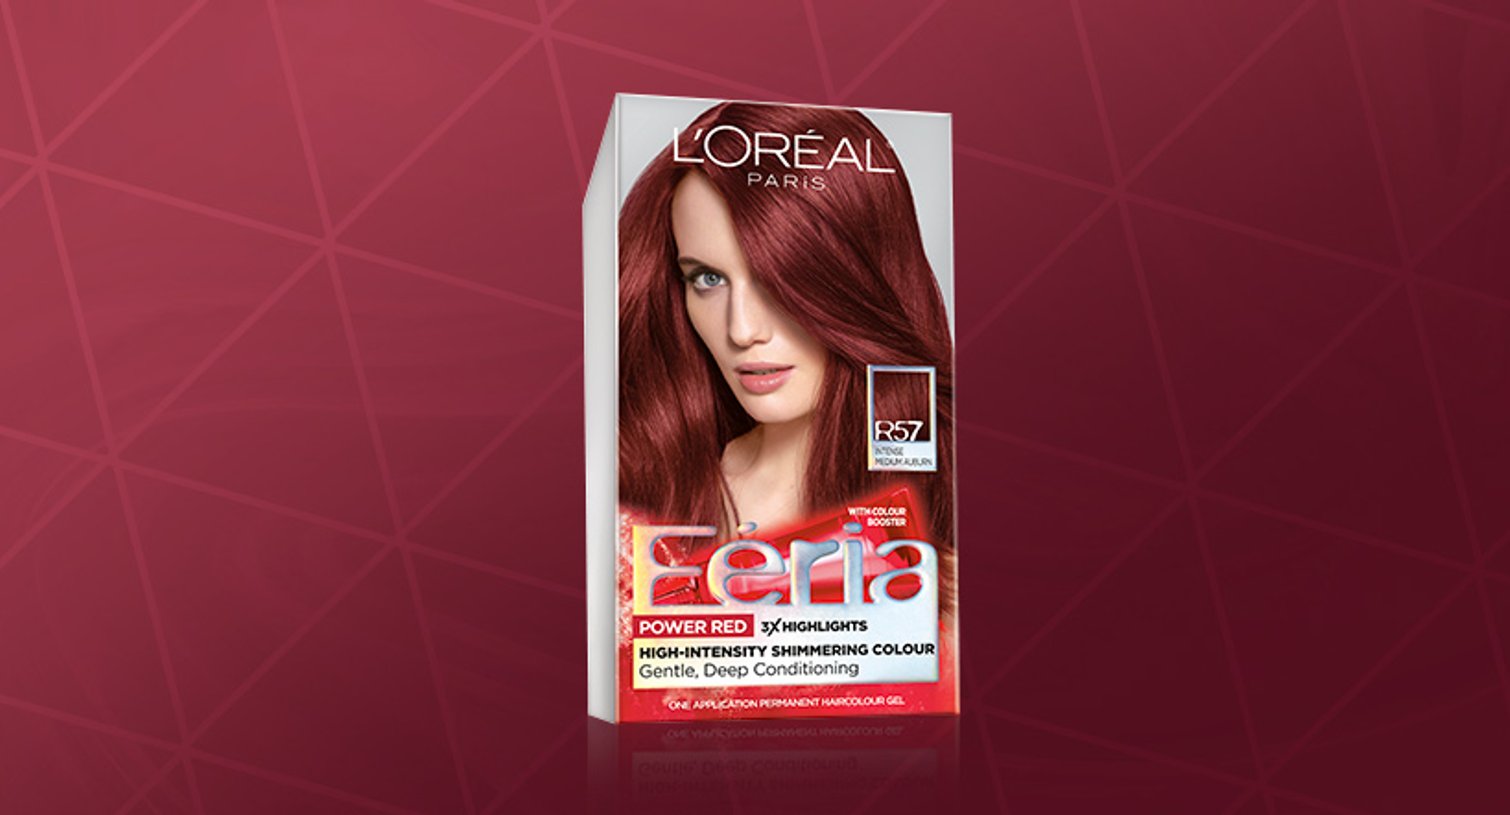 Loreal Paris BMAG Slideshow How To Get A Bold Red Hair Color SLIDE 5